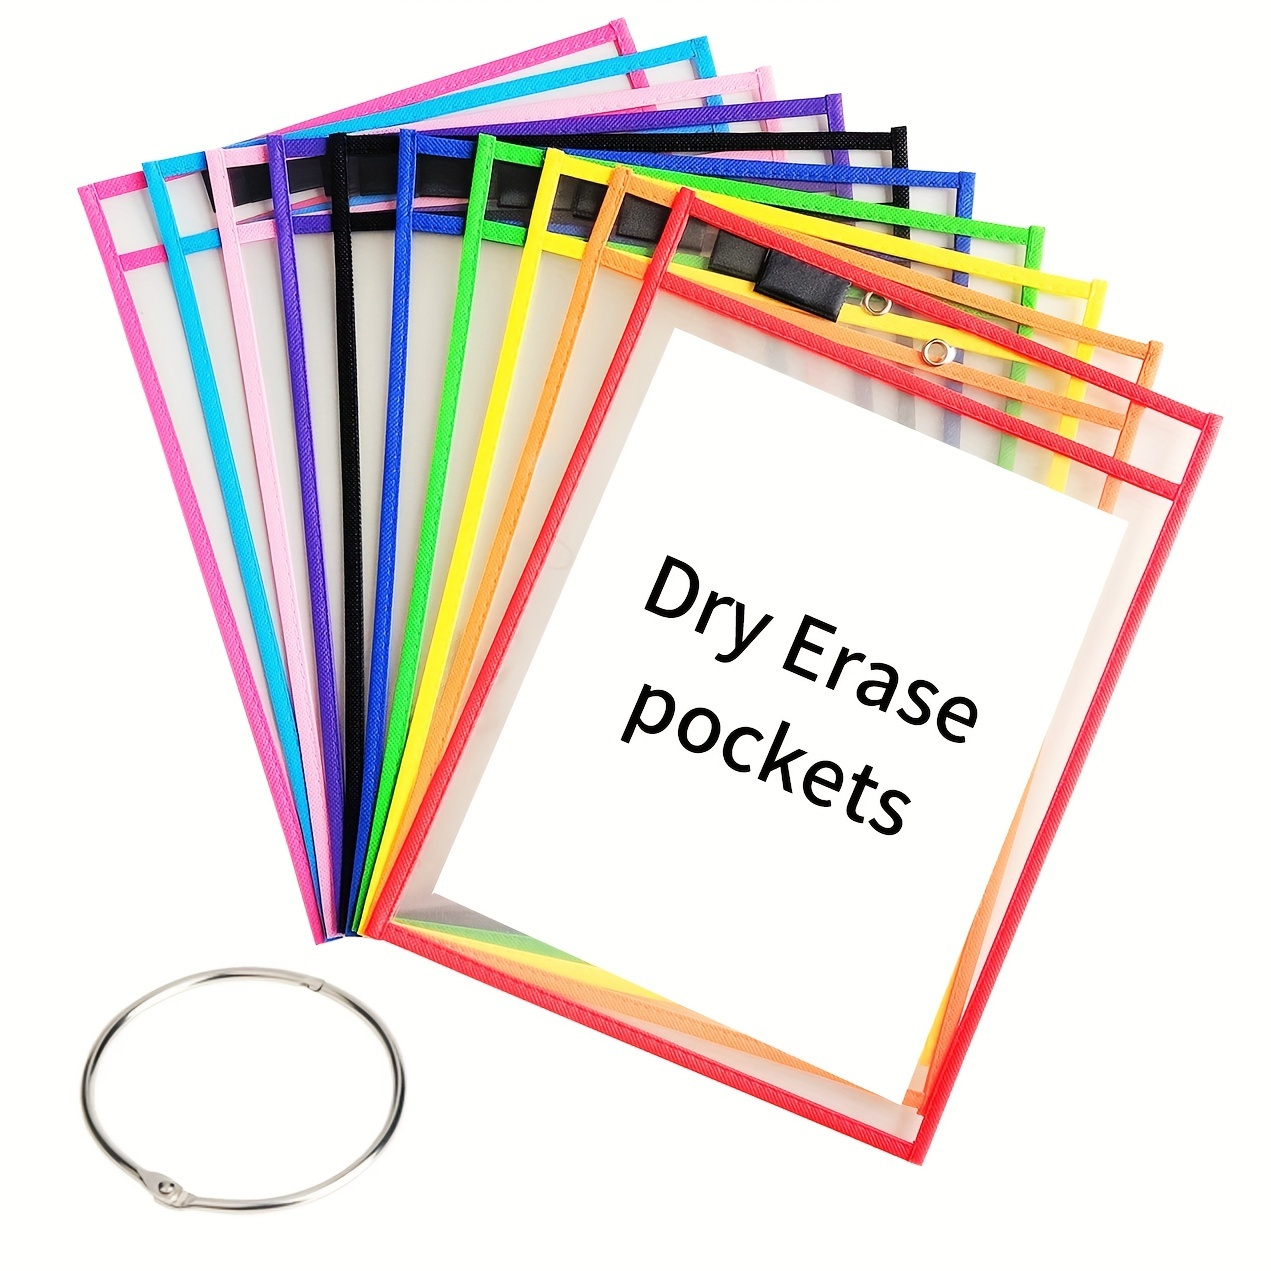 

6/10/20/30pcs Reusable Dry Erase Pocket, Oversized Oversized Write And Wipe Pockets With Rings, Clear Plastic Sheet Protectors, Teacher School Classroom Supplies Art Supplies